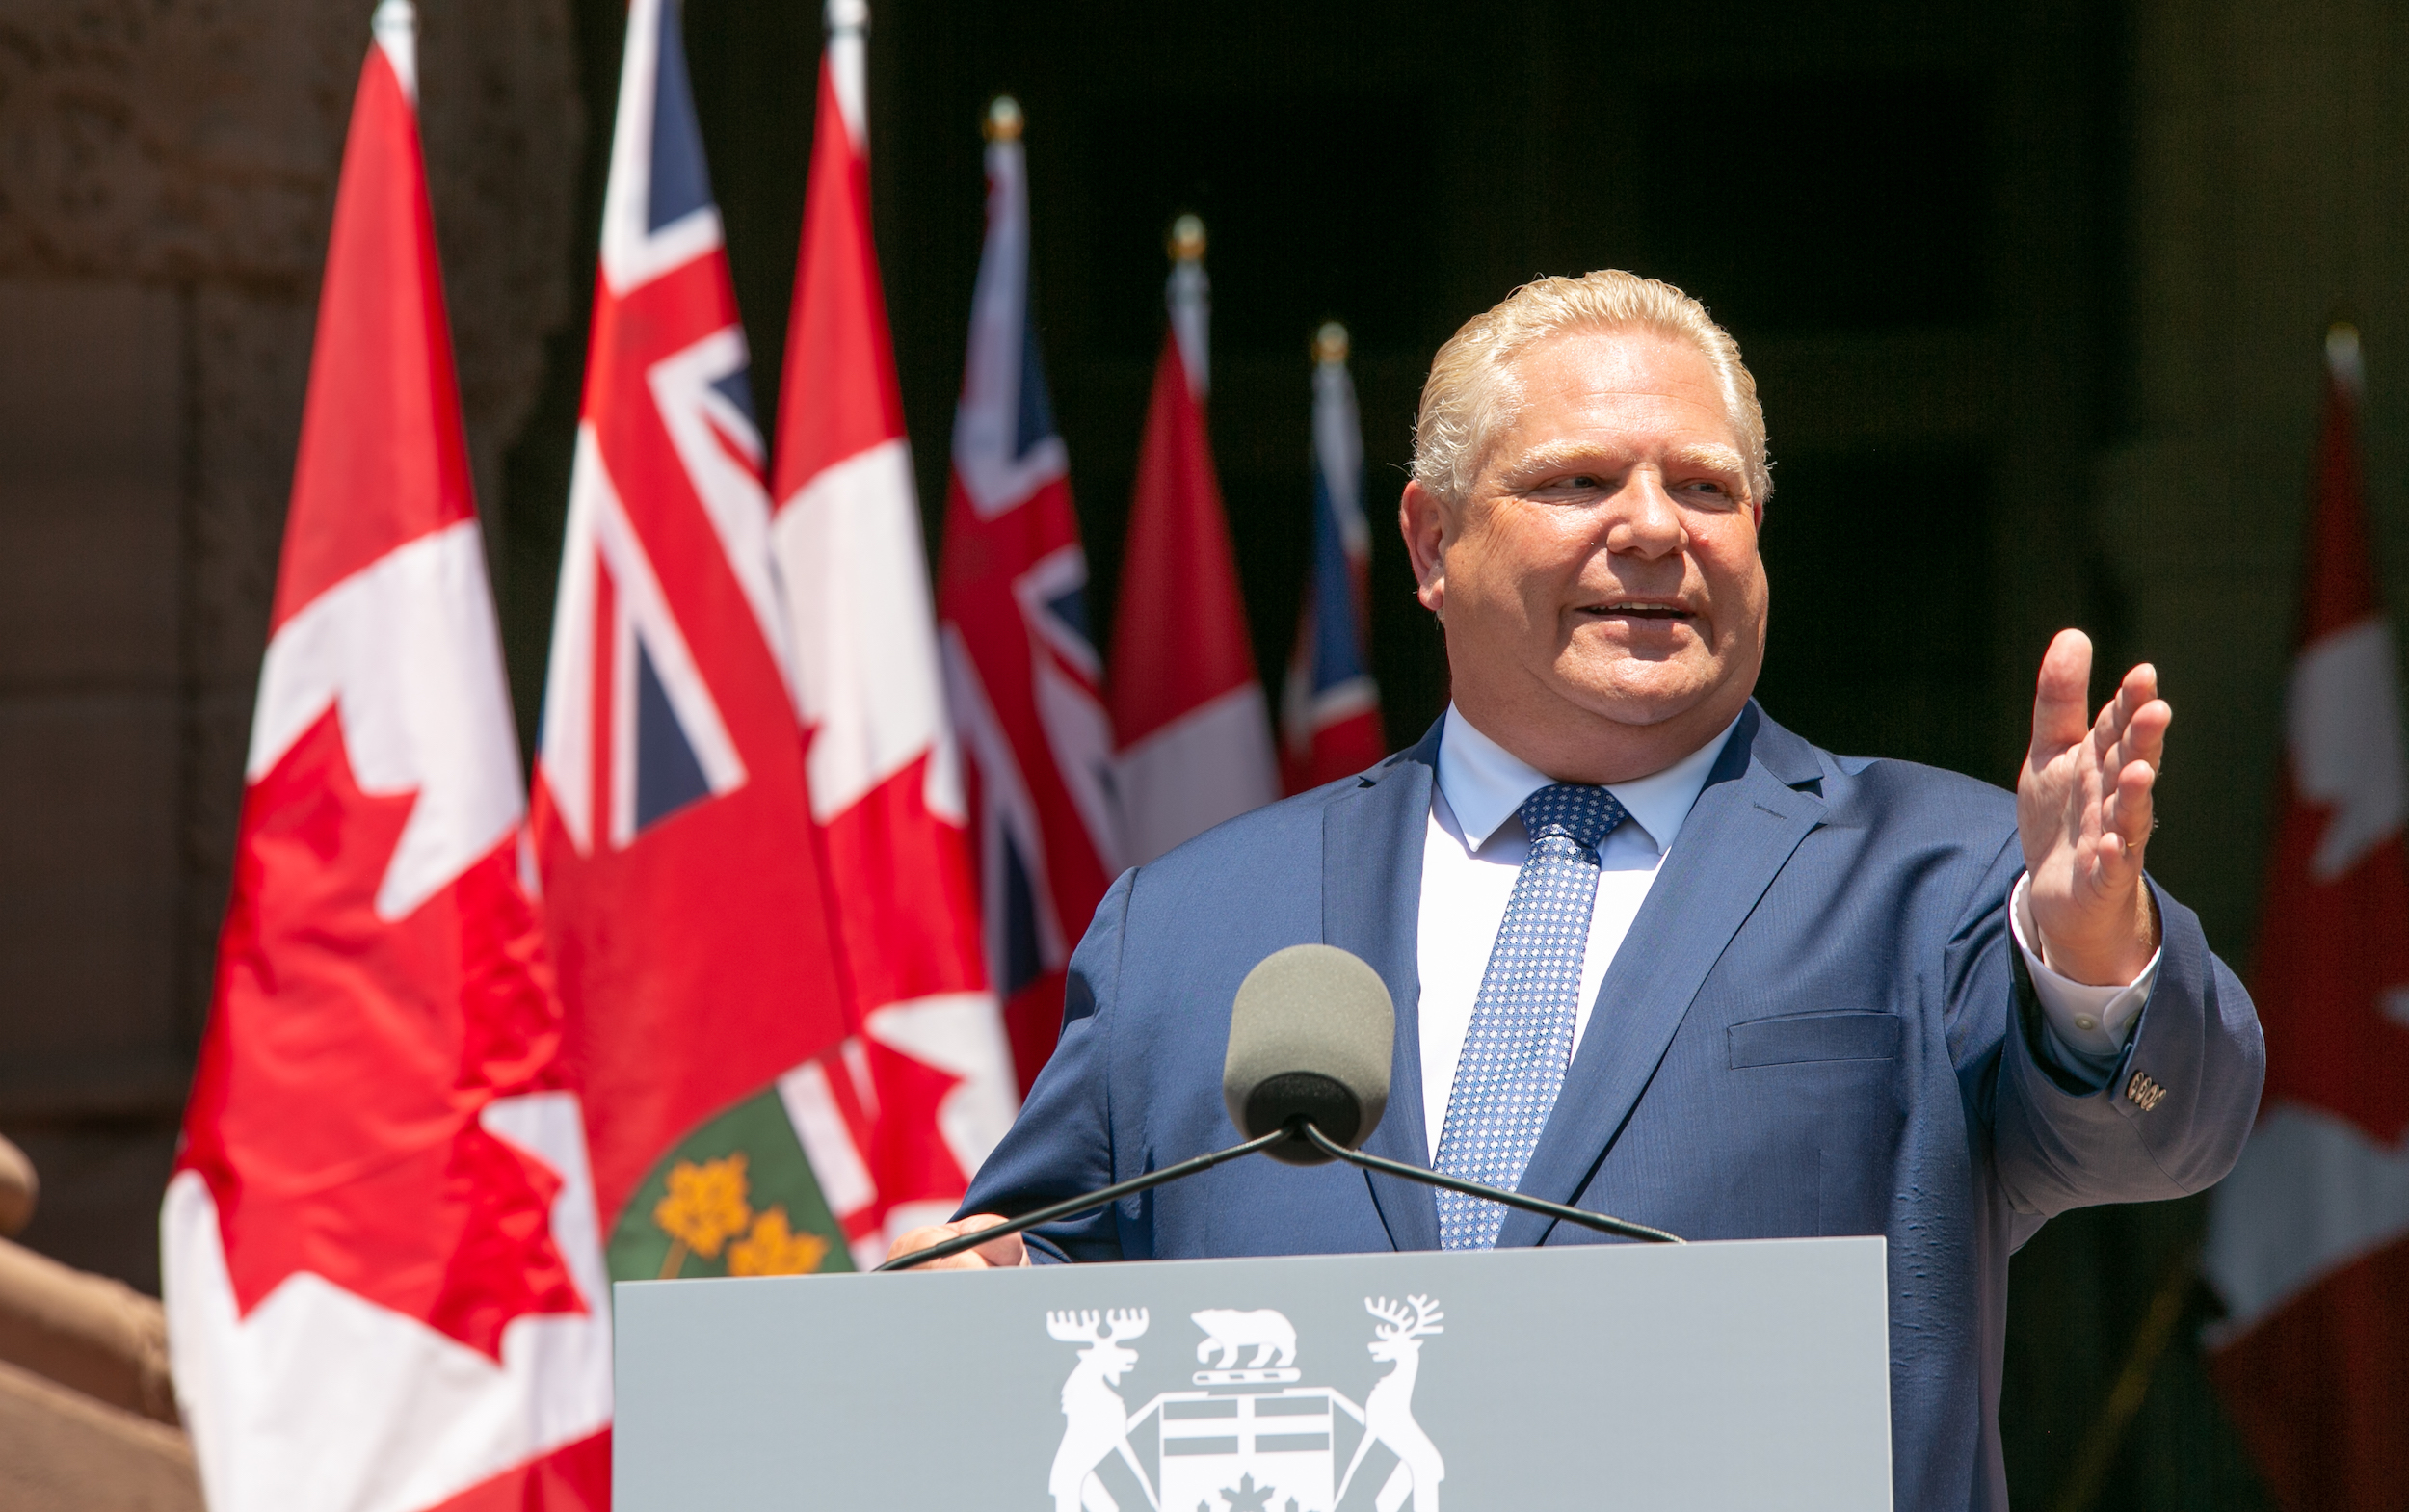 Doug Ford at his 2018 swearing in ceremony. Last November, the premier broke a promise he made on the campaign trail, and opened parts of the protected Greenbelt to development.